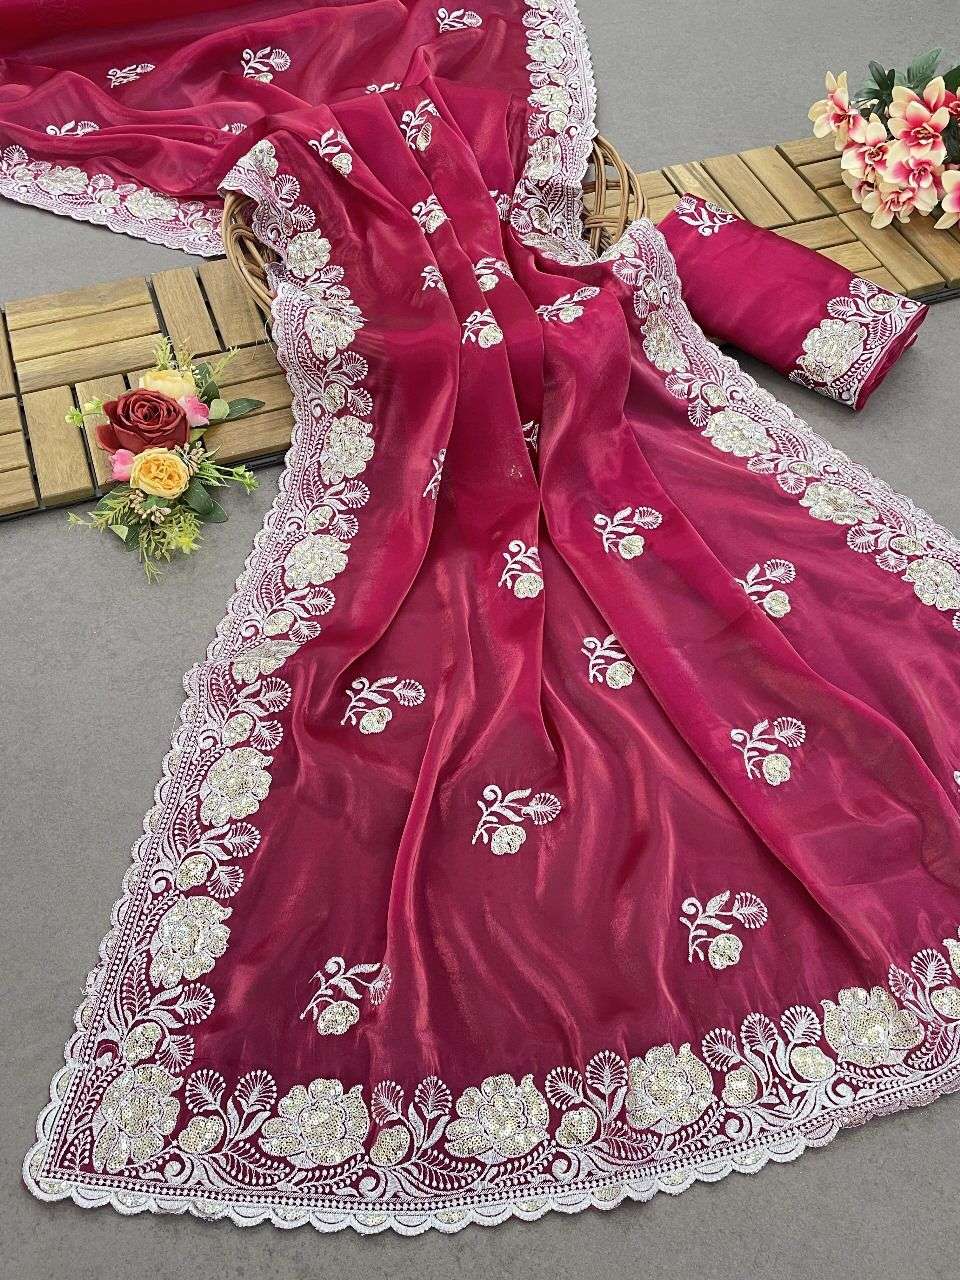 JIMMY CHOO WITH EMBROIDERY WORK DESIGNER SAREE COLLECTION AT...